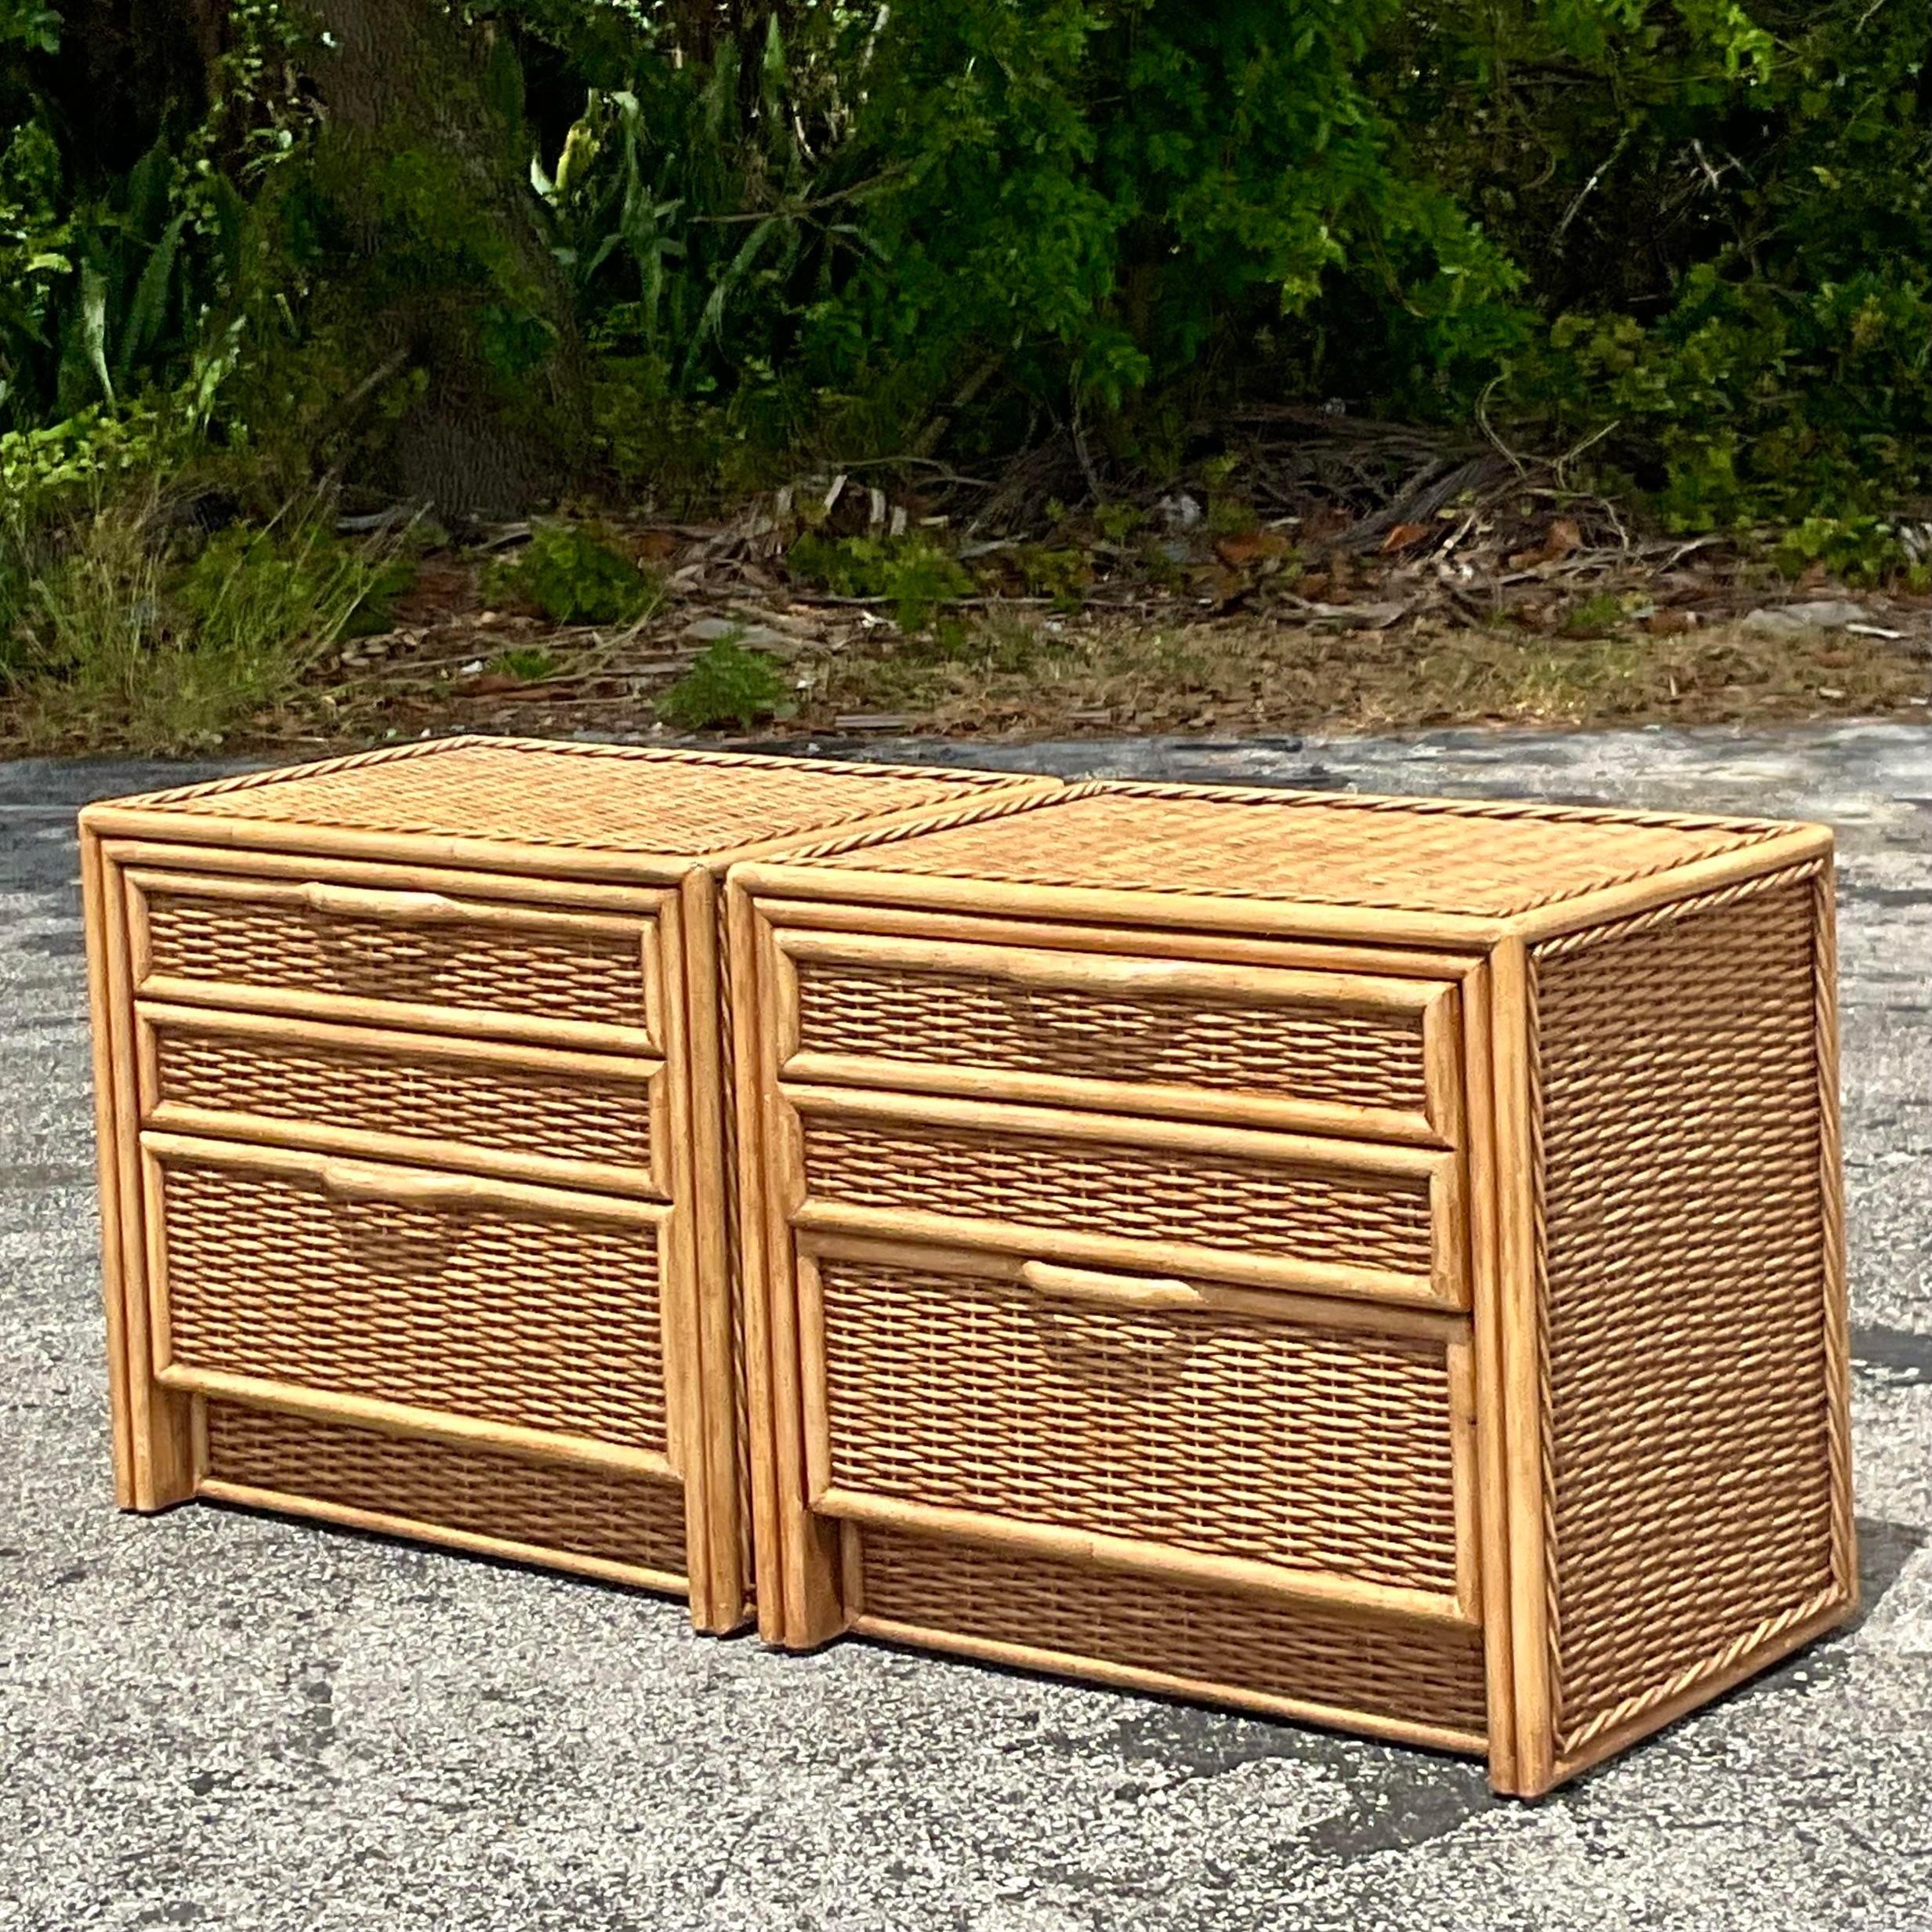 Seaside Serenity: These Vintage Coastal Woven Rattan Nightstands - A Pair, evoke the tranquil beauty of American coastal living. Crafted with meticulous weaving and timeless design, they blend natural textures with classic functionality, reflecting